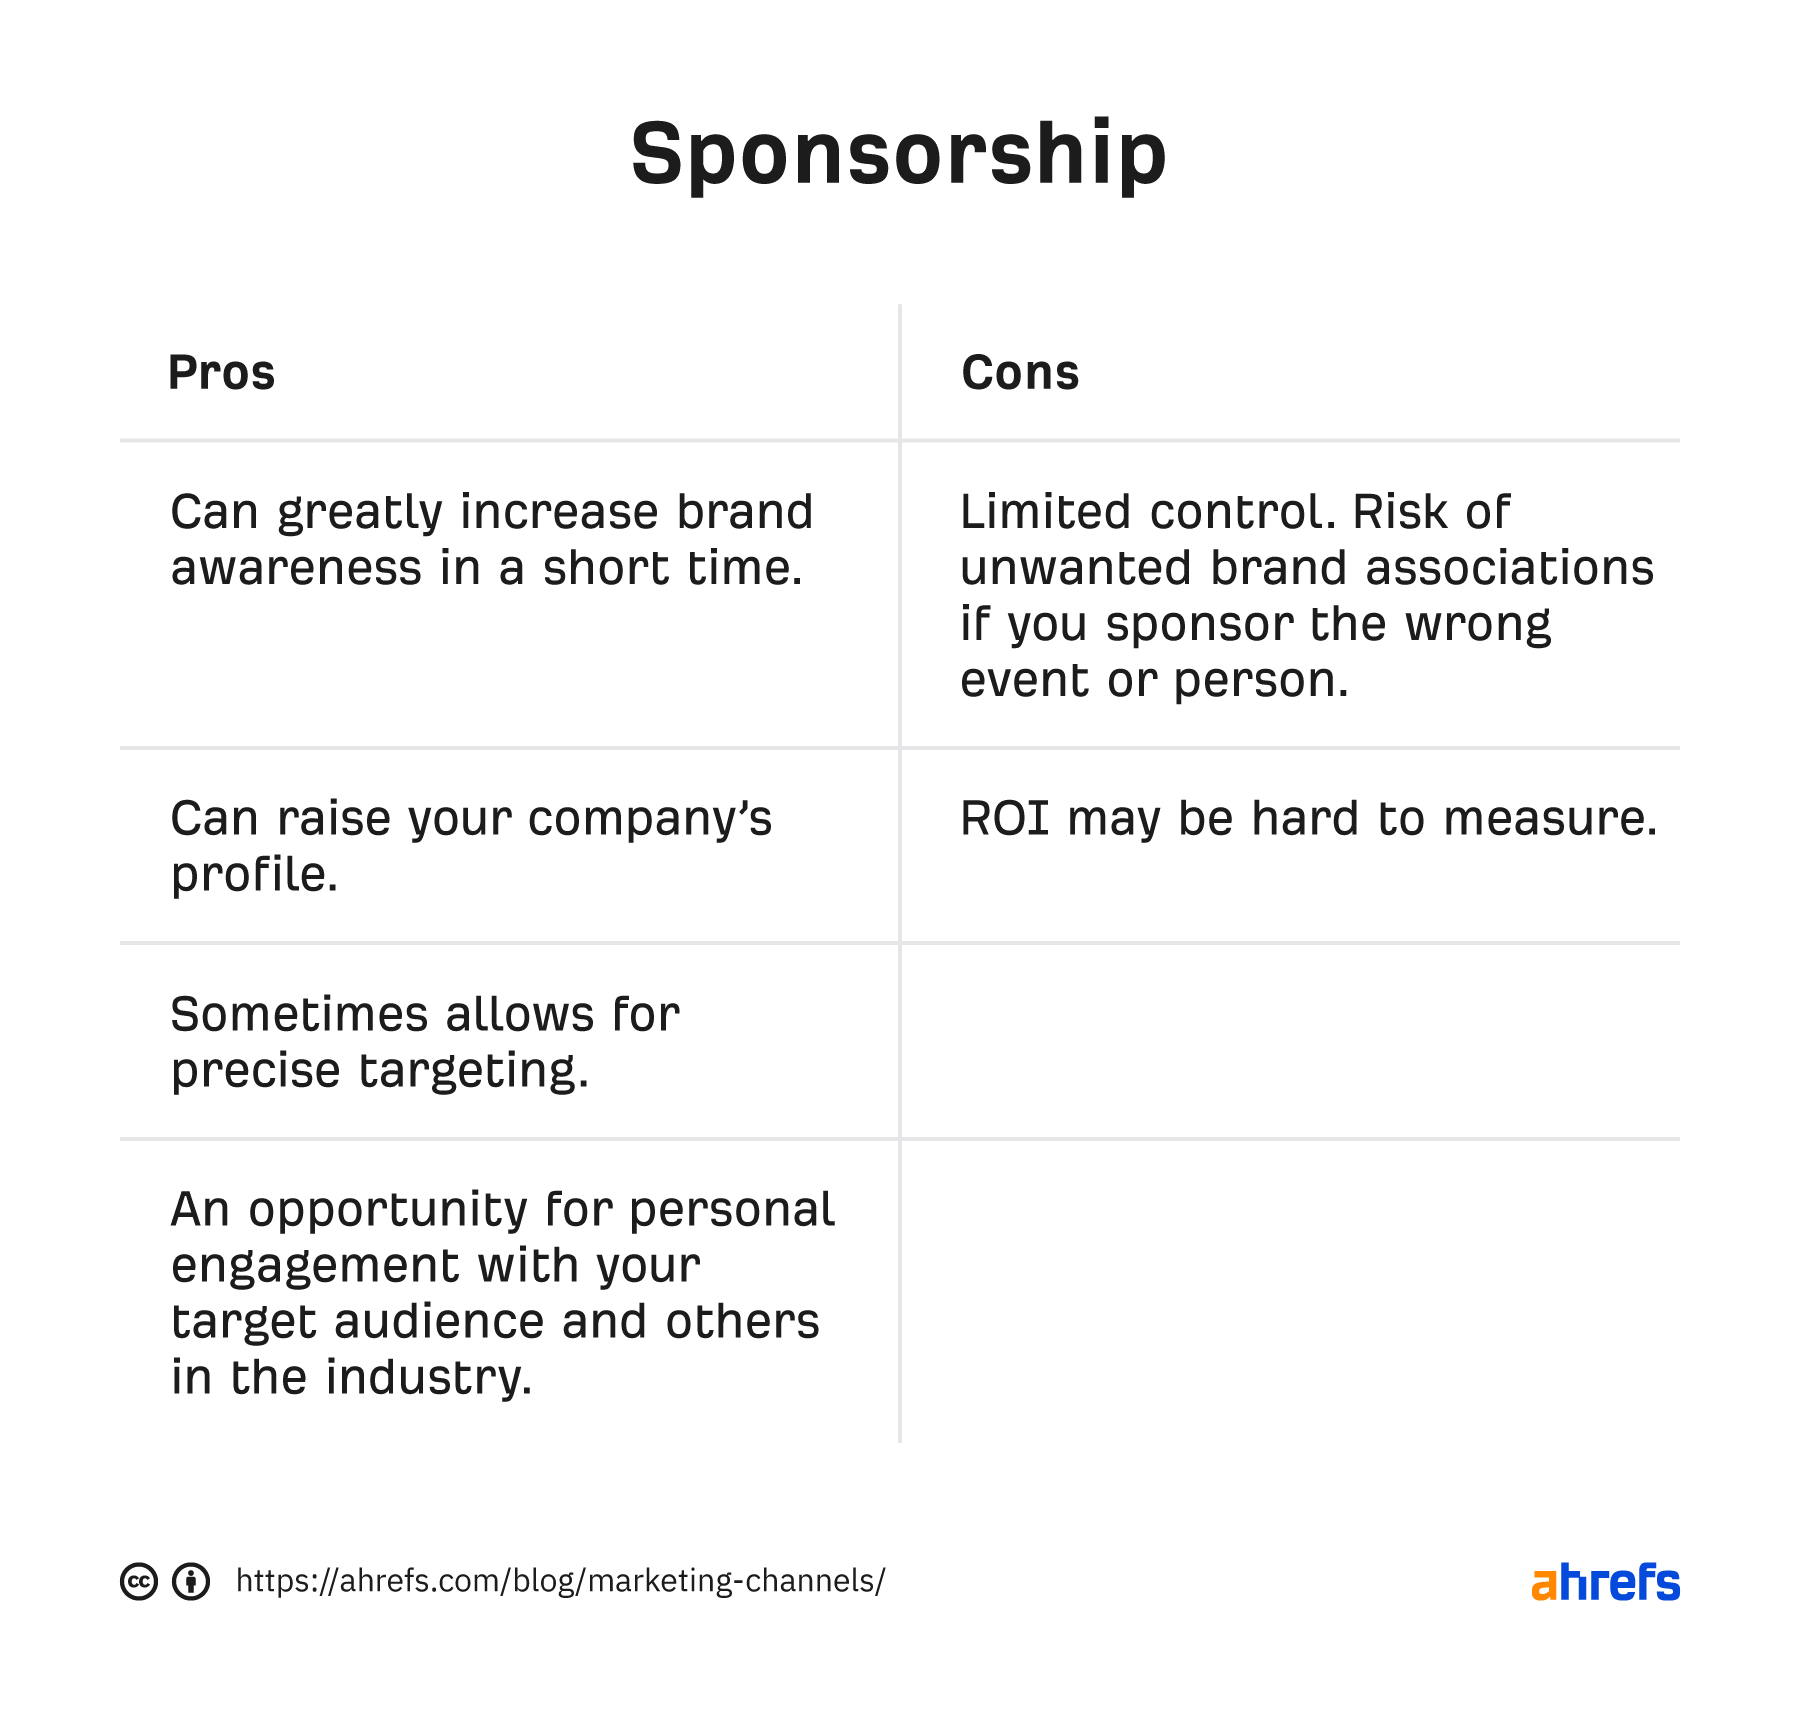 Pros and cons of sponsorship